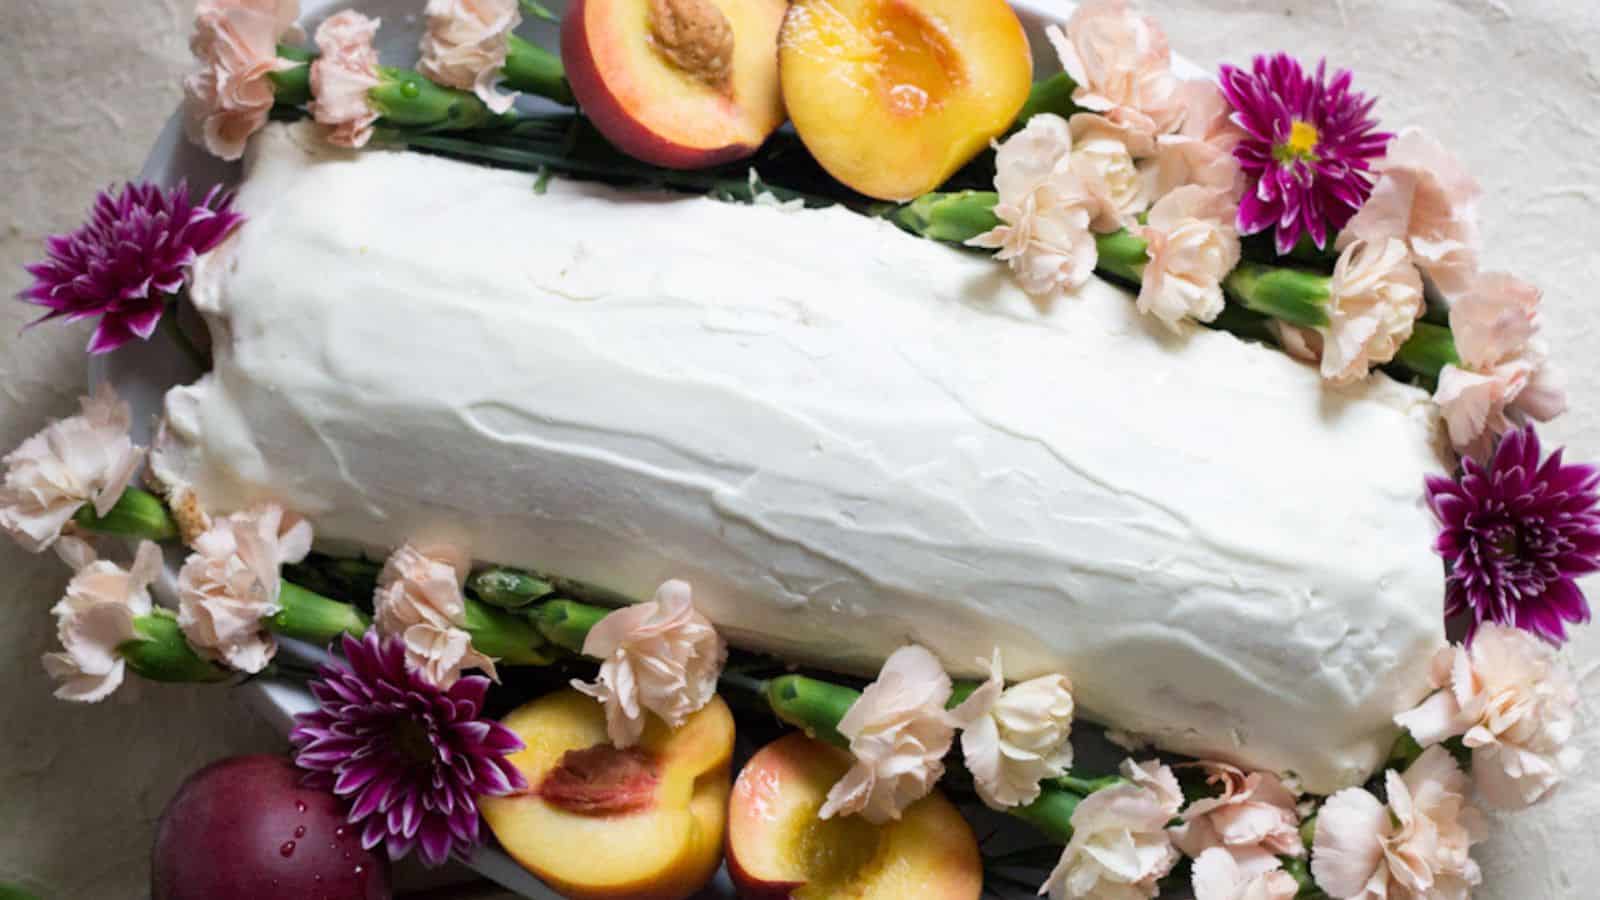 <p>My grandmother’s peach Swiss roll is a gluten-free dessert that’s ready in about an hour. It’s a sweet homage to the past, wrapped up with the fresh, juicy flavors of peaches, showing that gluten-free can still mean full of taste and tradition.<br><strong>Get the Recipe: </strong><a href="https://immigrantstable.com/ukrainian-bell-pepper-lecho/?utm_source=msn&utm_medium=page&utm_campaign=21%20grandma%20faves%20that%20aren't%20just%20nostalgic%20but%20irresistible">My grandmother’s peach Swiss roll (gluten-free)</a></p>